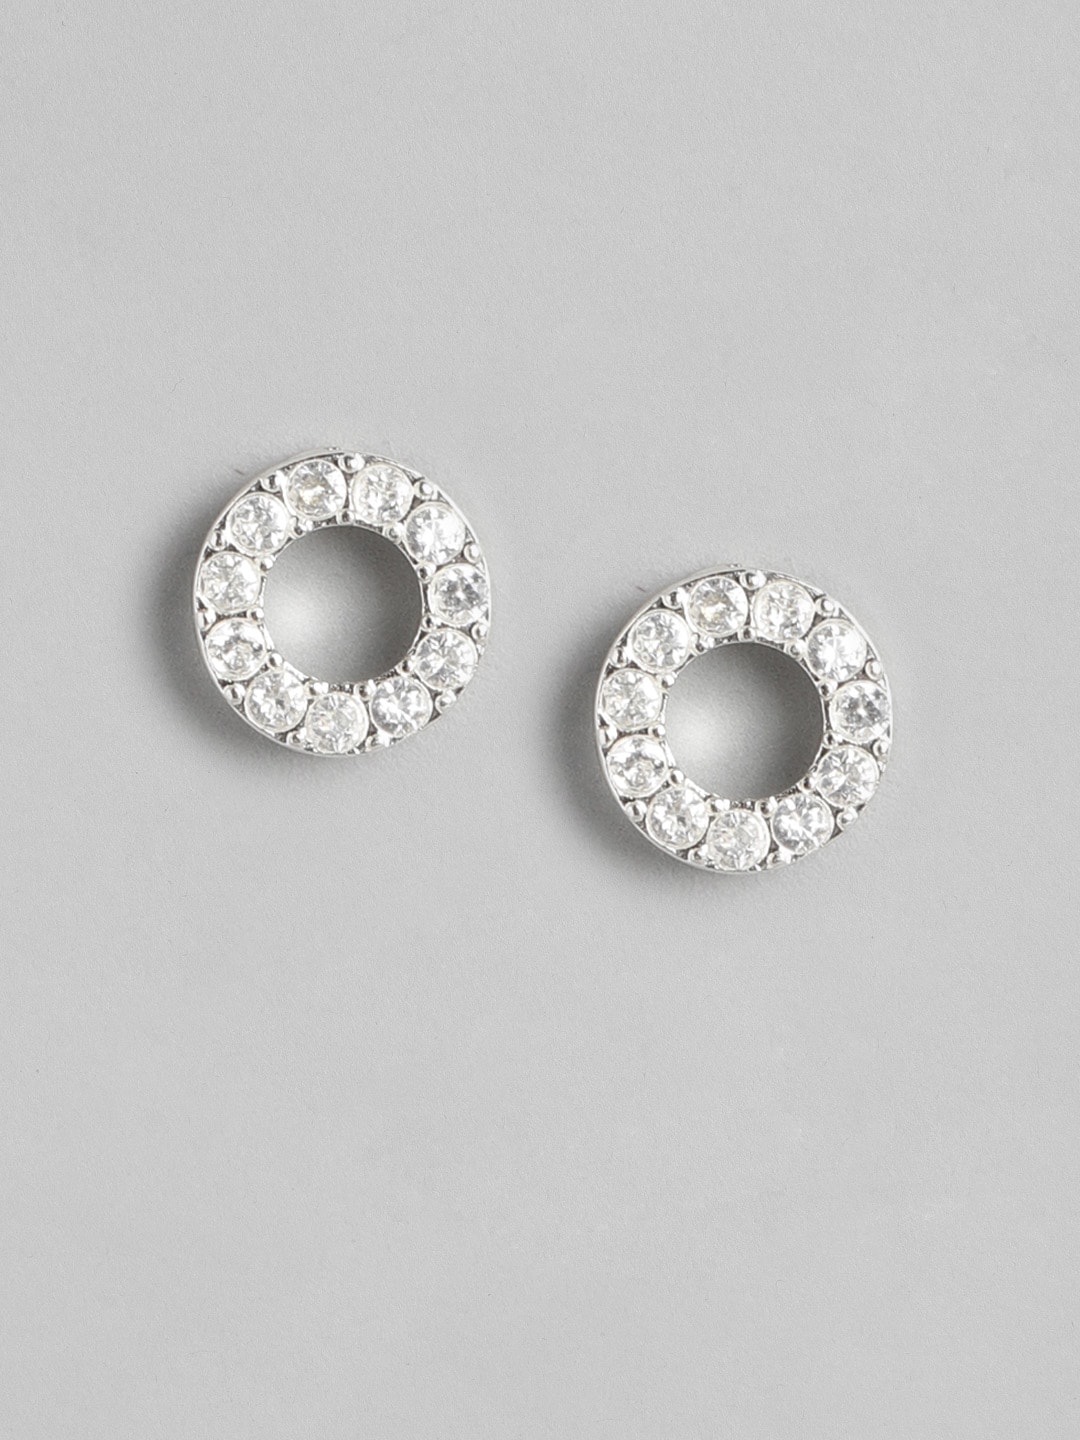 Forever New Silver-Toned Circular Studs Earrings Price in India